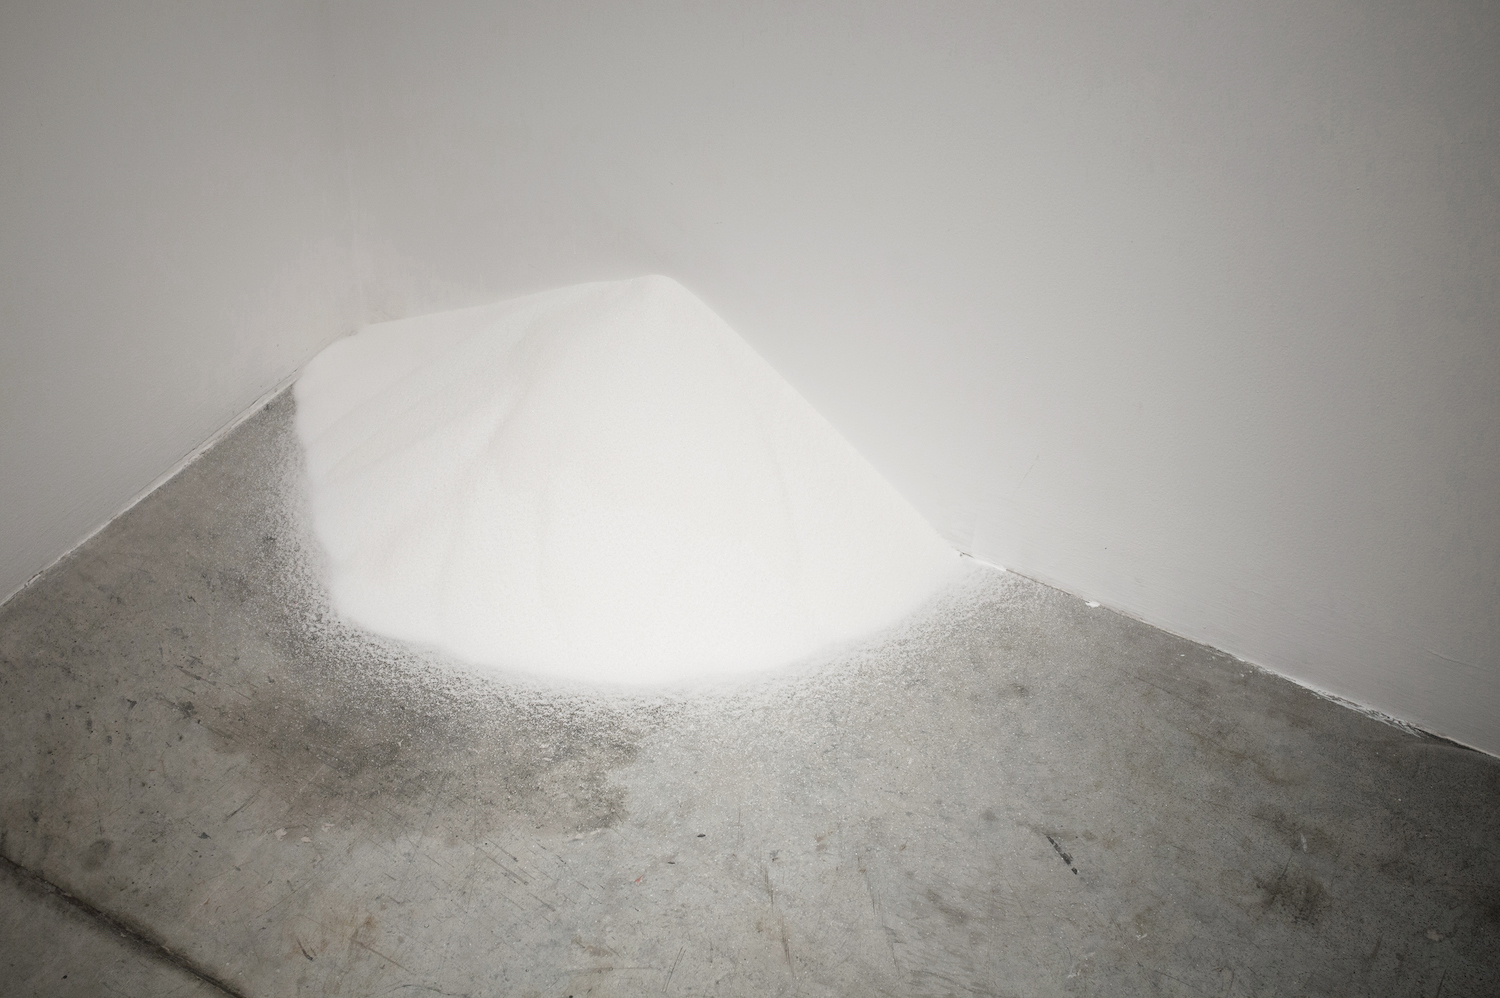  Dream salt (detail) 2014 An equal stack of mixed sugar and salt Variable dimensions 